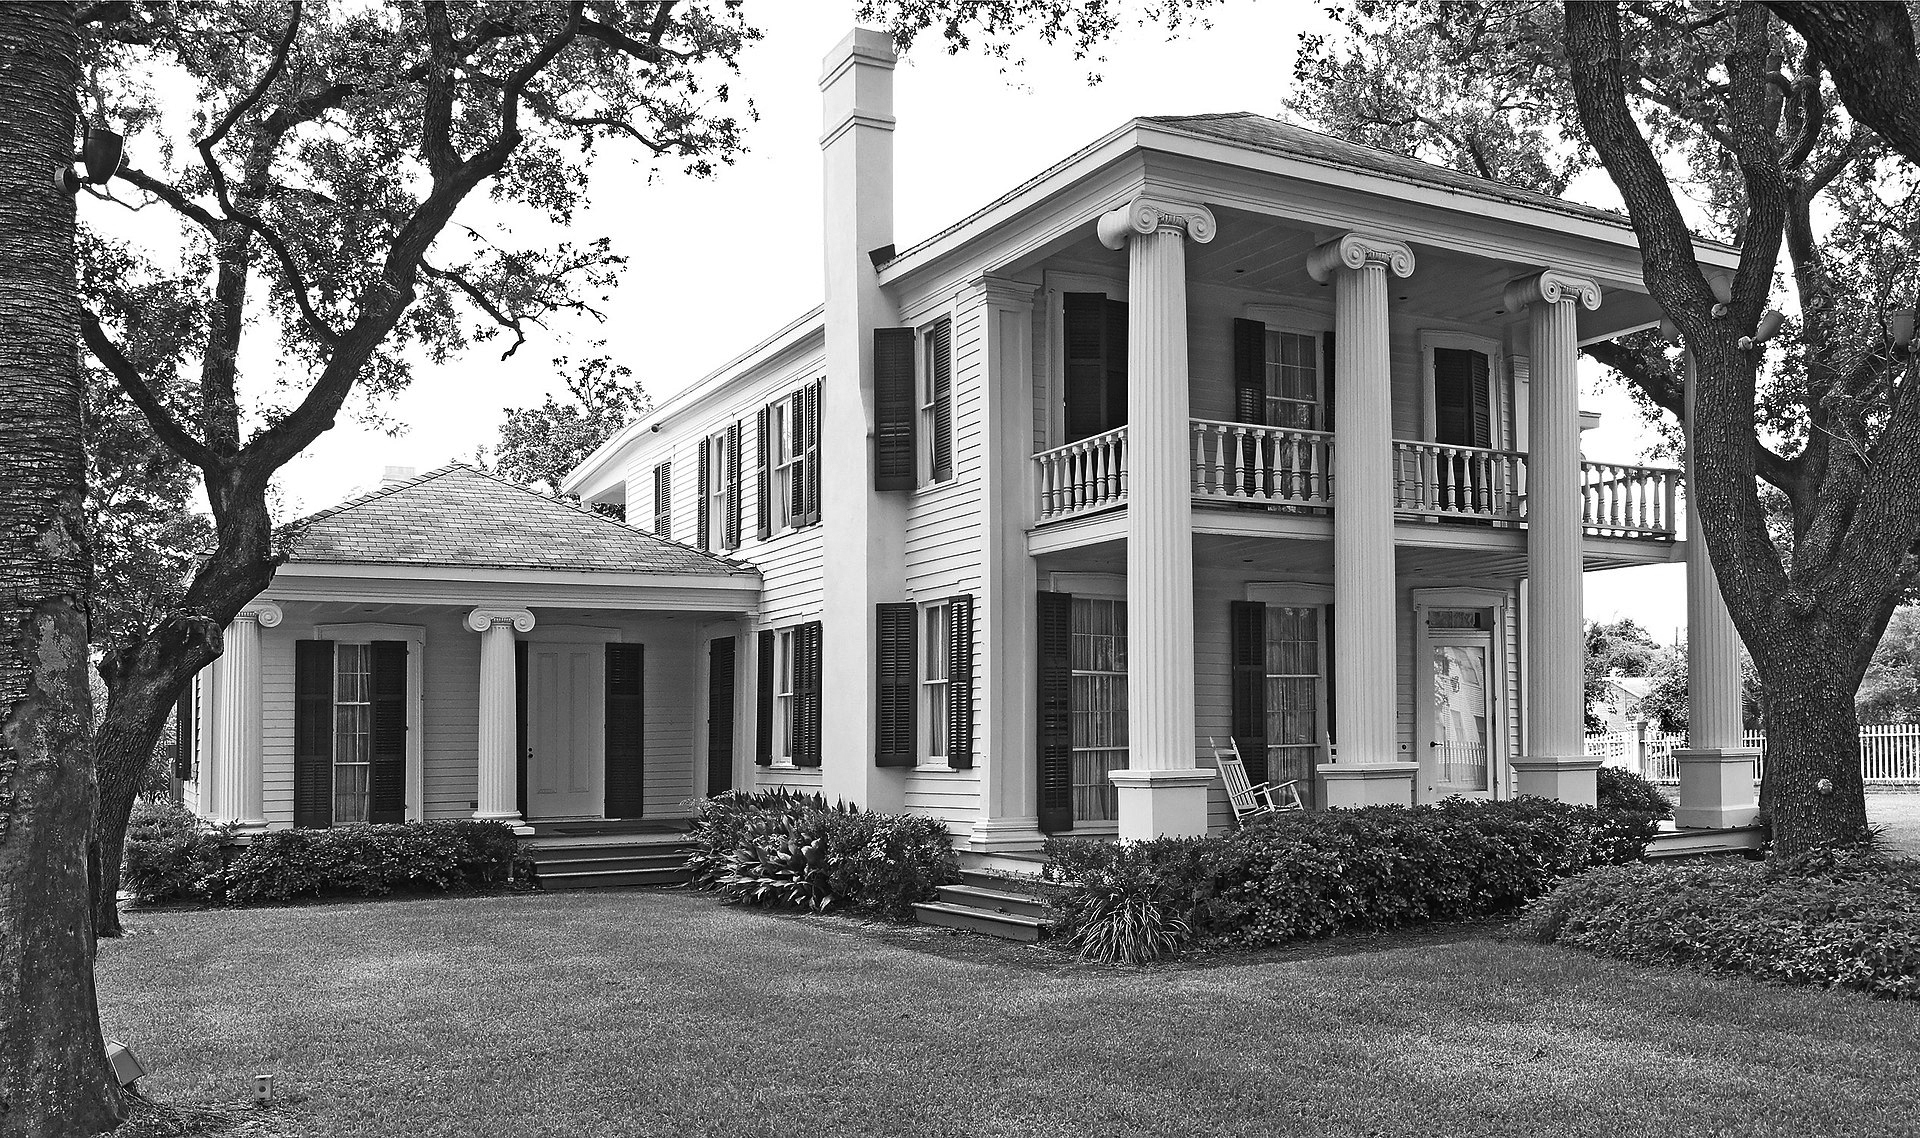 Michael B. Menard's house is one of the haunted places in Galveston